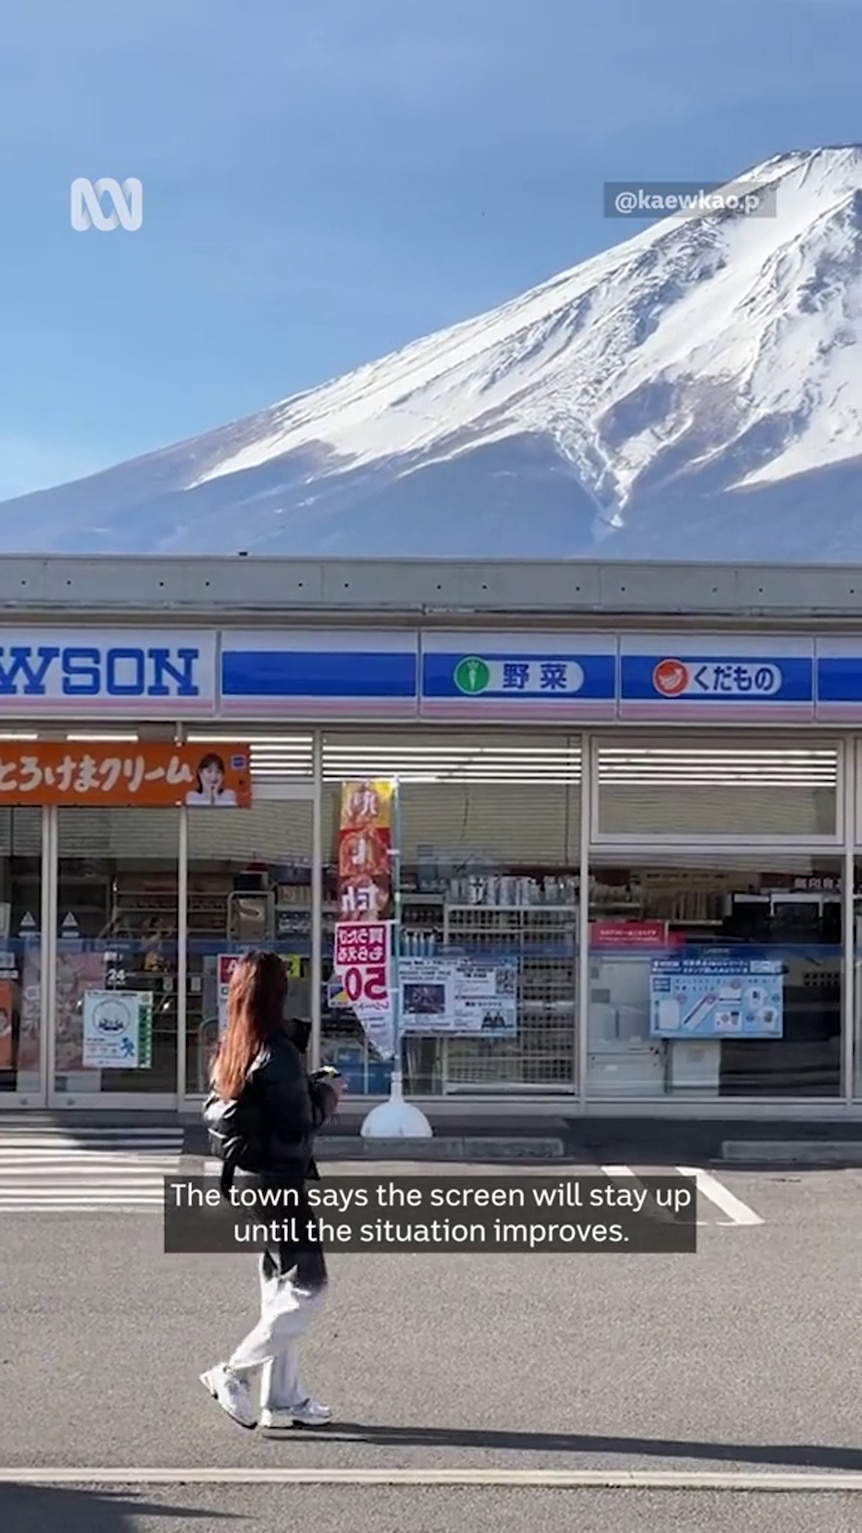 A storefront with Japanese and Roman characters sits in front of a partially cropped snow-capped mountain